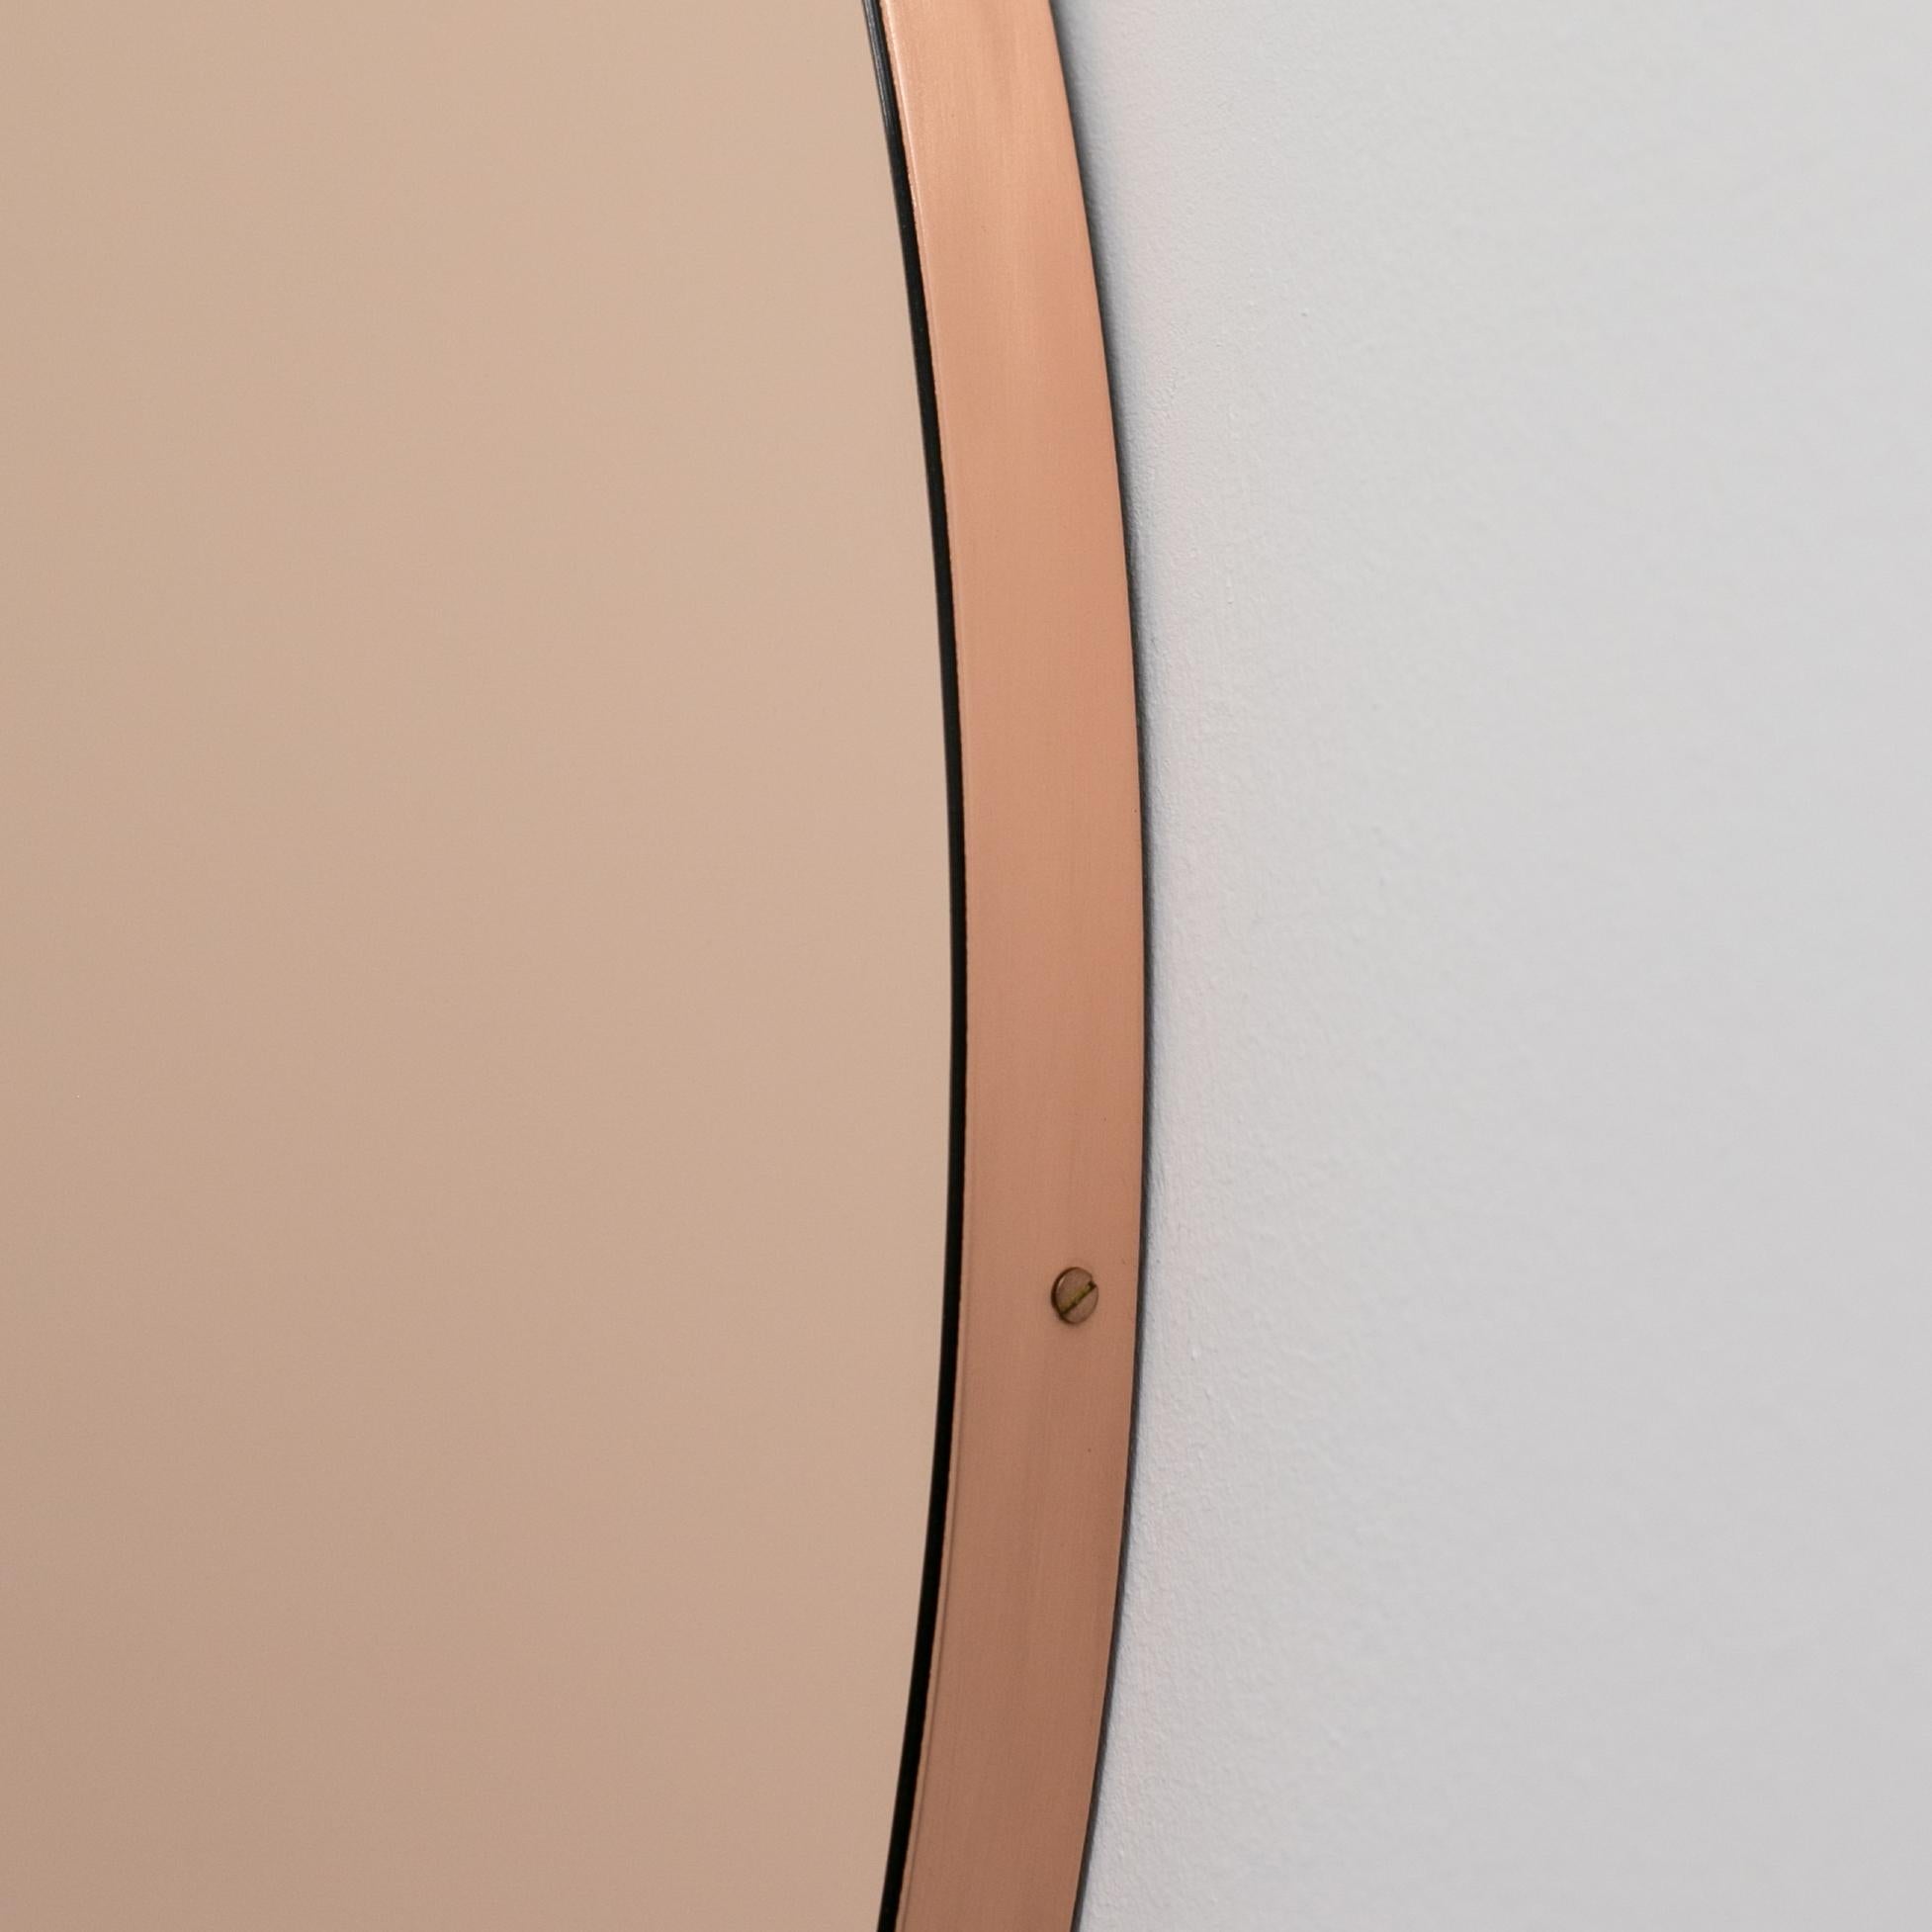 Orbis Dualis Mixed 'Rose Gold + Silver' Round Mirror with Copper Frame, Oversized 5